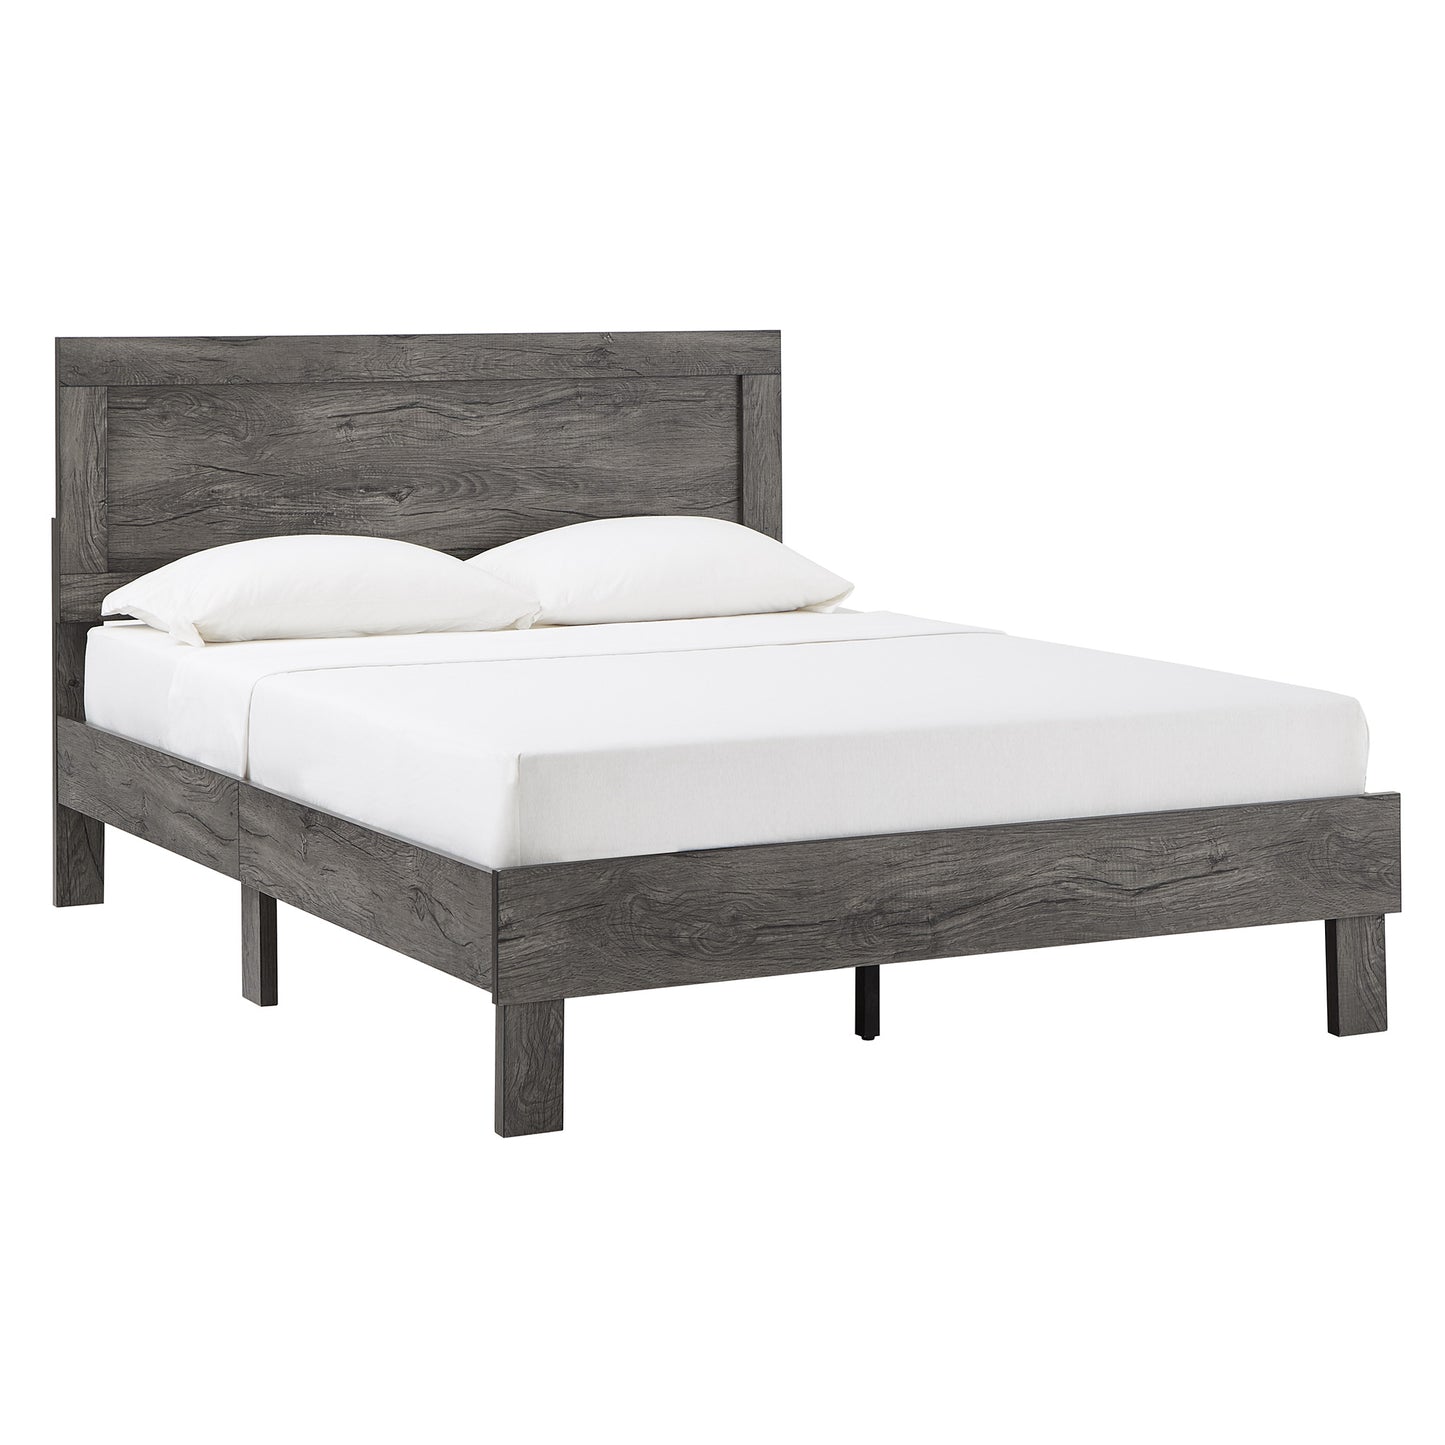 Wood Finish Platform Bed - Grey Finish, Queen (Queen Size)